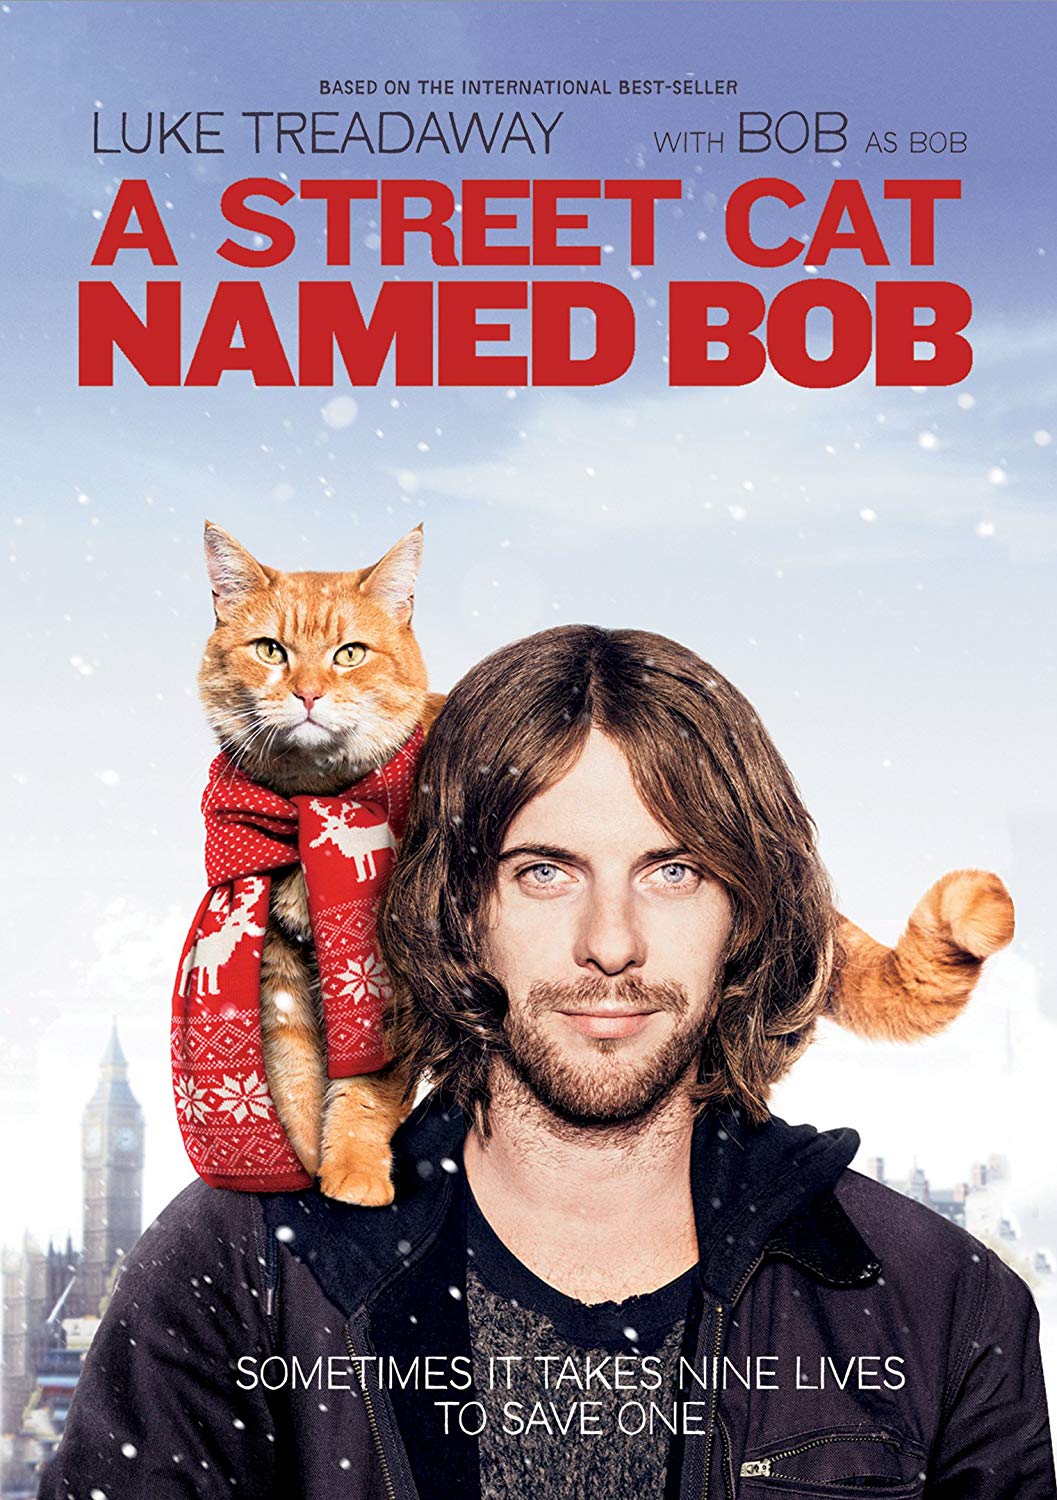 movie poster for A Street Cat Named Bob, a skinny man in a leather jacket with floppy hair and a ginger tabby cat wearing a scarf sitting on his shoulder